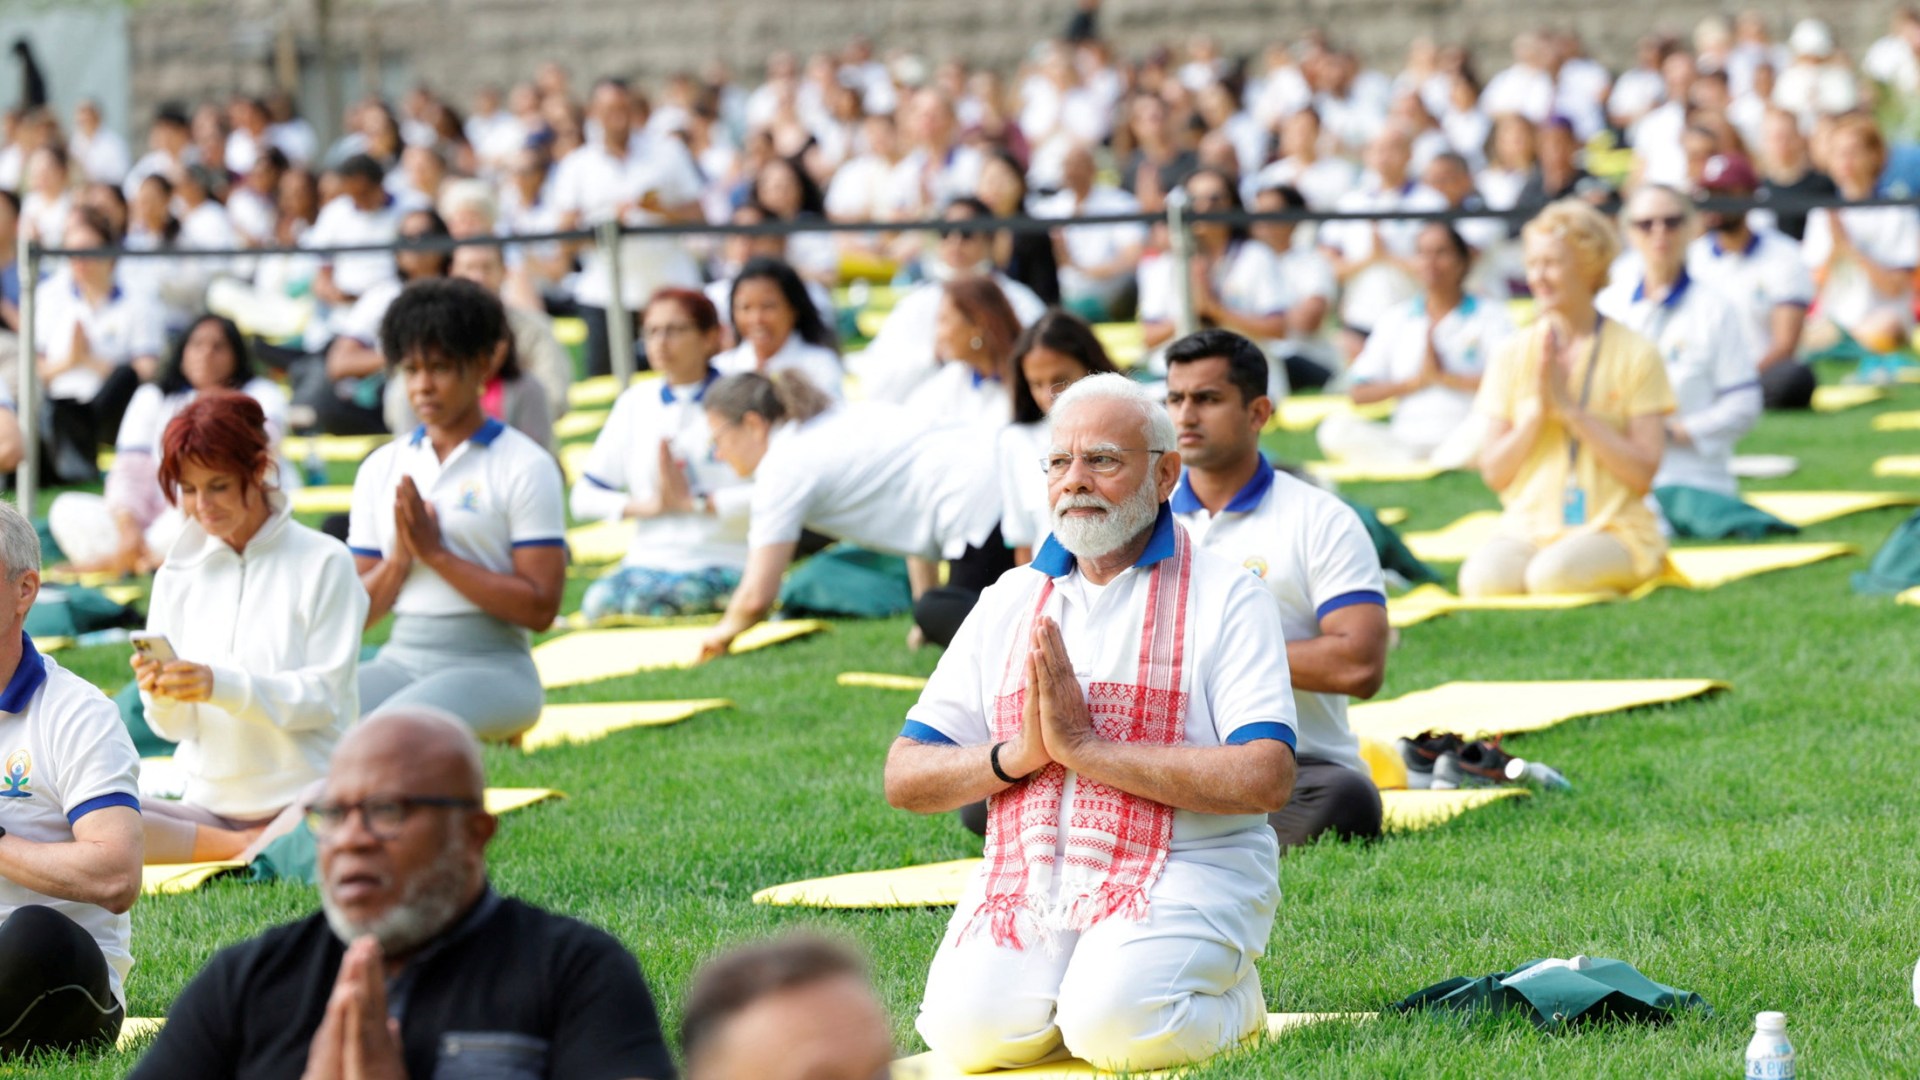 Om-washing': Why Modi's yoga day pose is deceptive, Arts and Culture